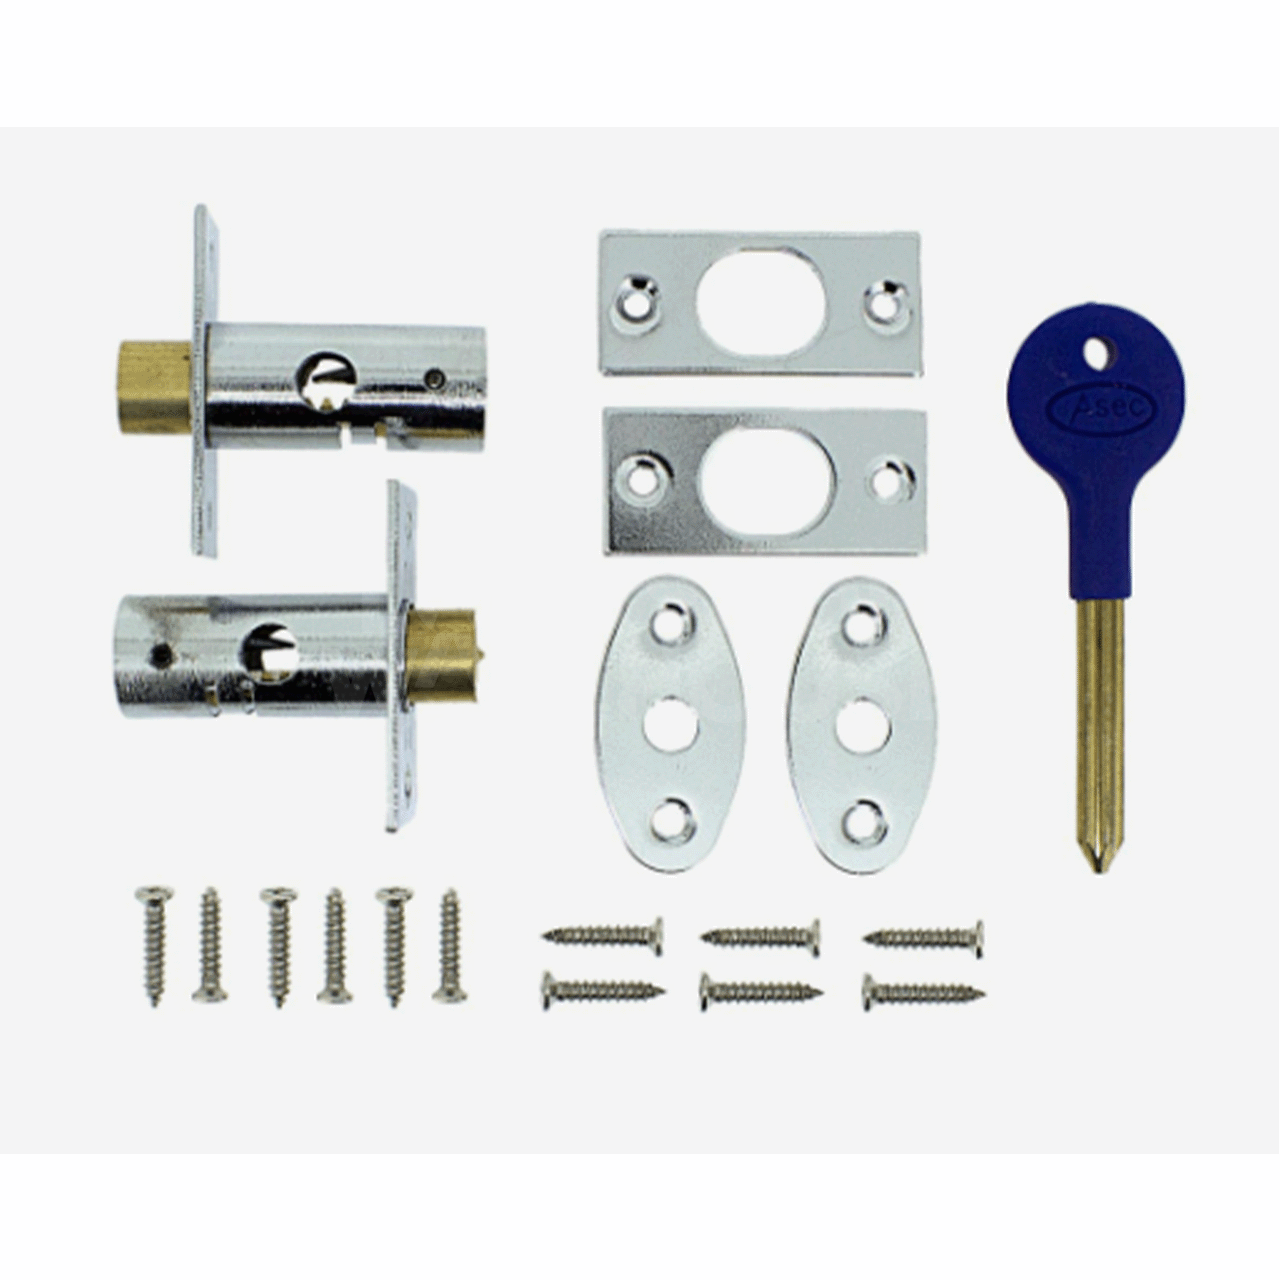 Dimensions Image: Asec Window Bolts ( 2 bolts and 1 key)